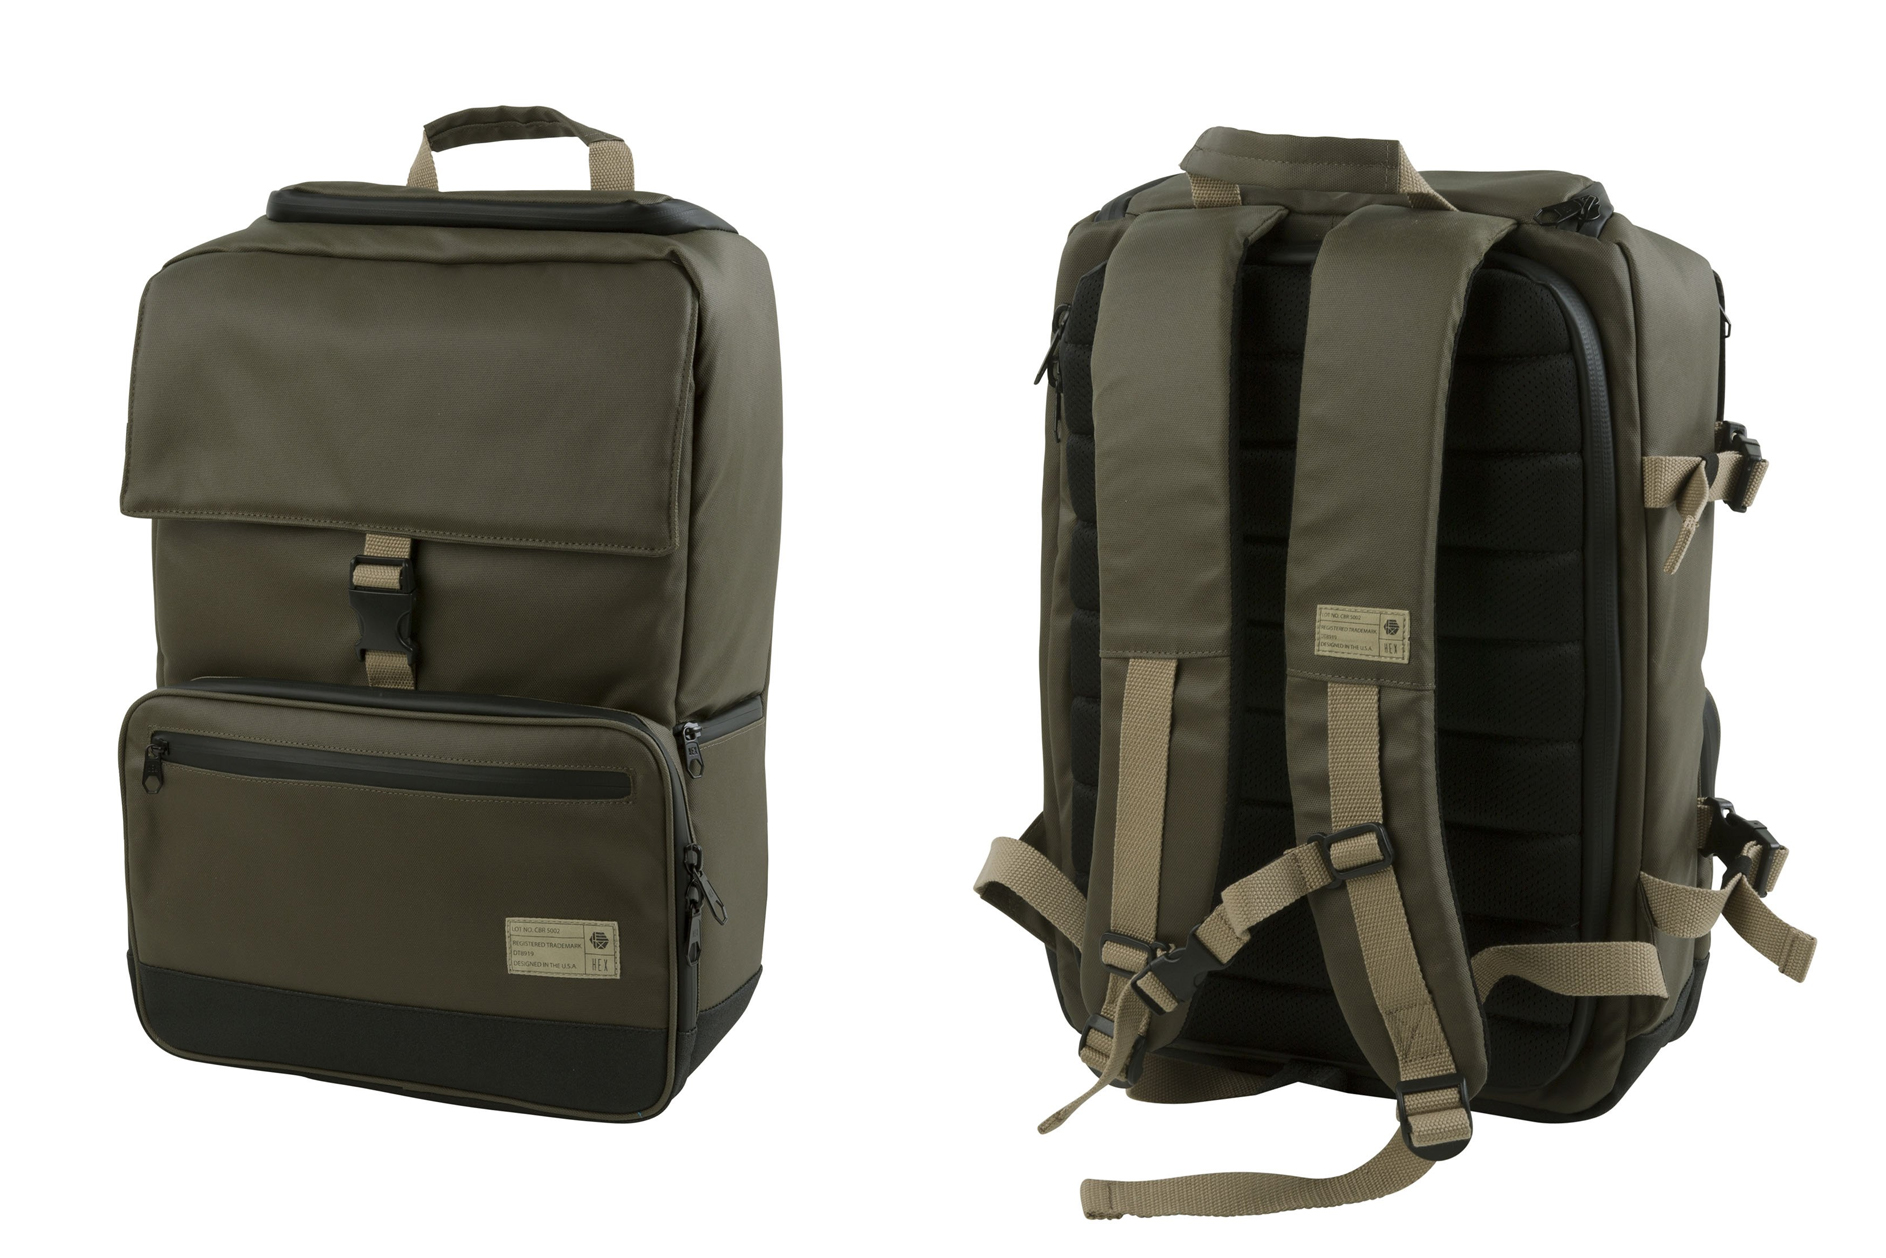 HEX Launches Spring Collection with New DSLR Backpacks